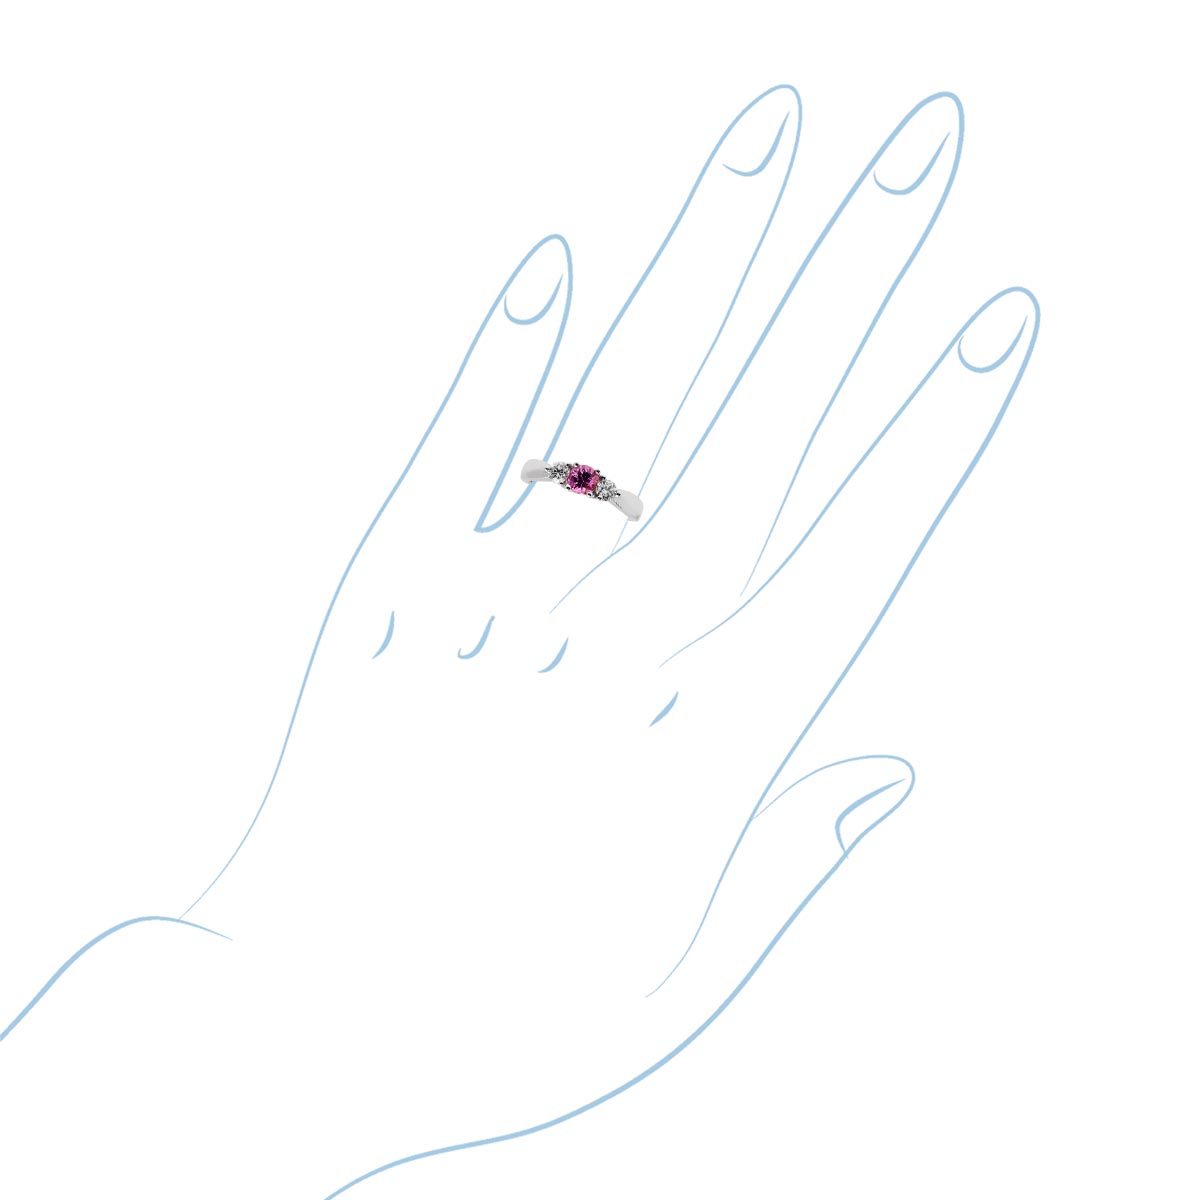 Pink Sapphire Ring in 14kt White Gold with Diamonds (1/4ct tw)